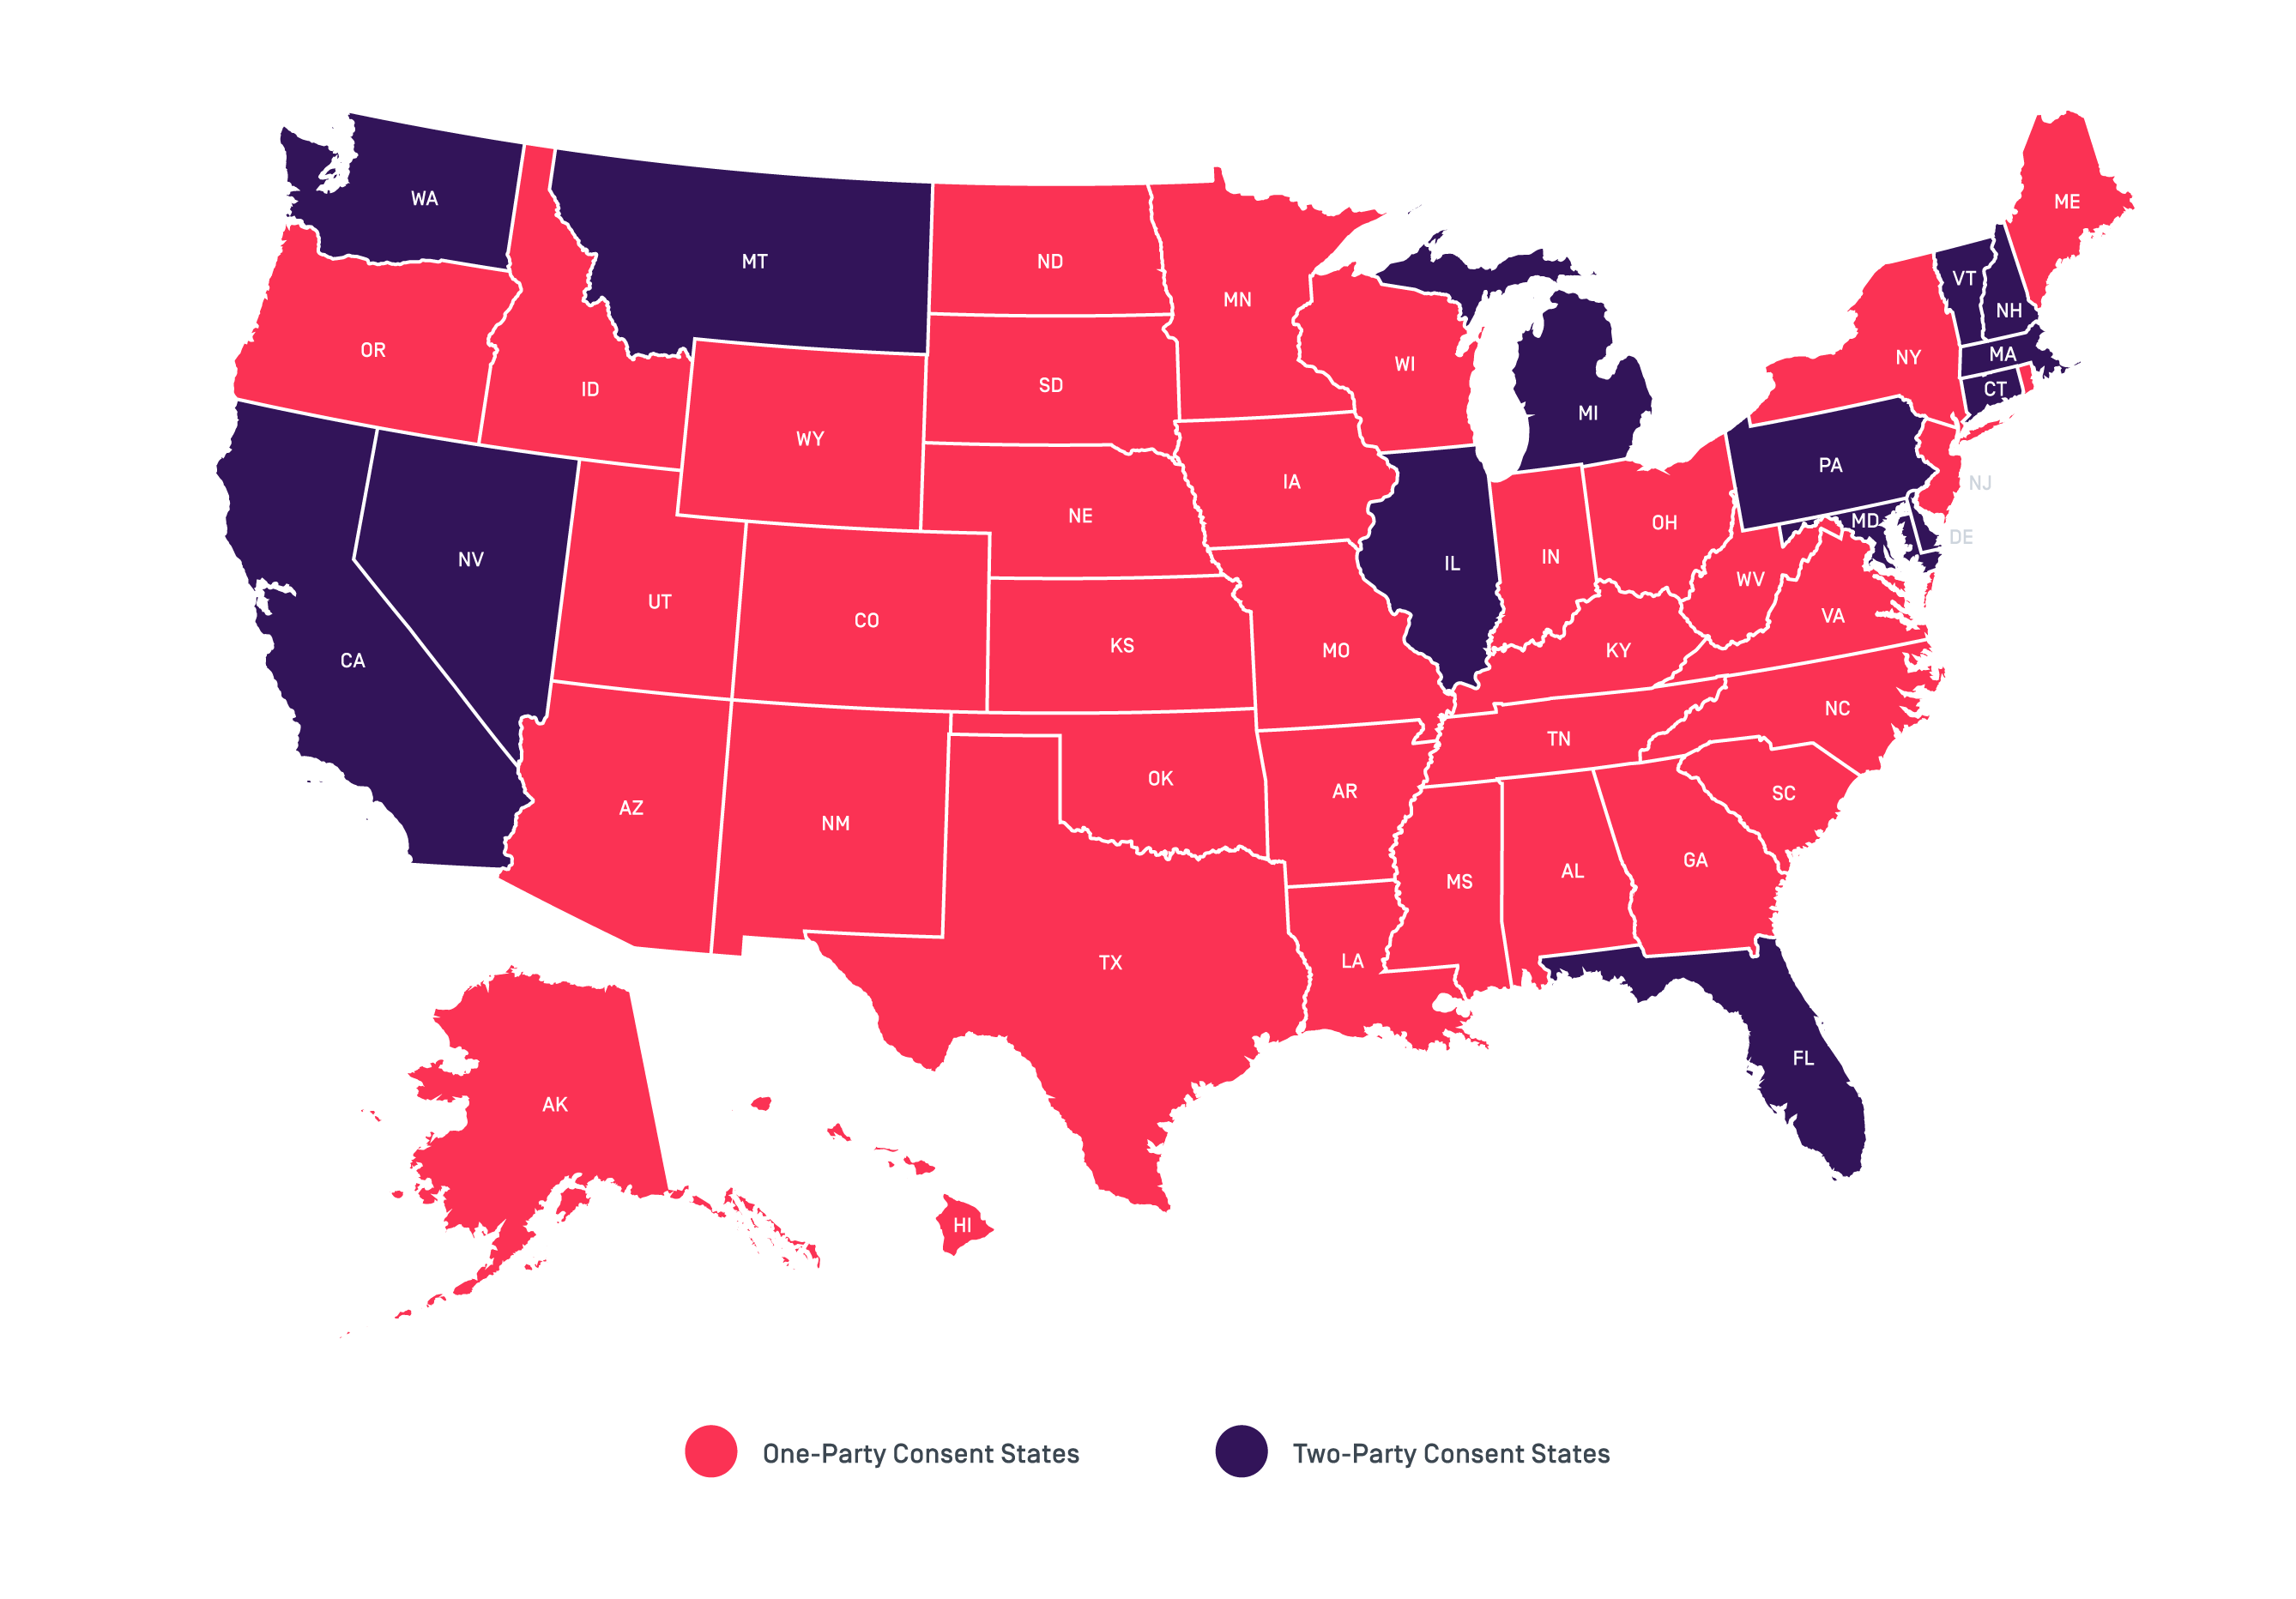 Call Recording Laws by State